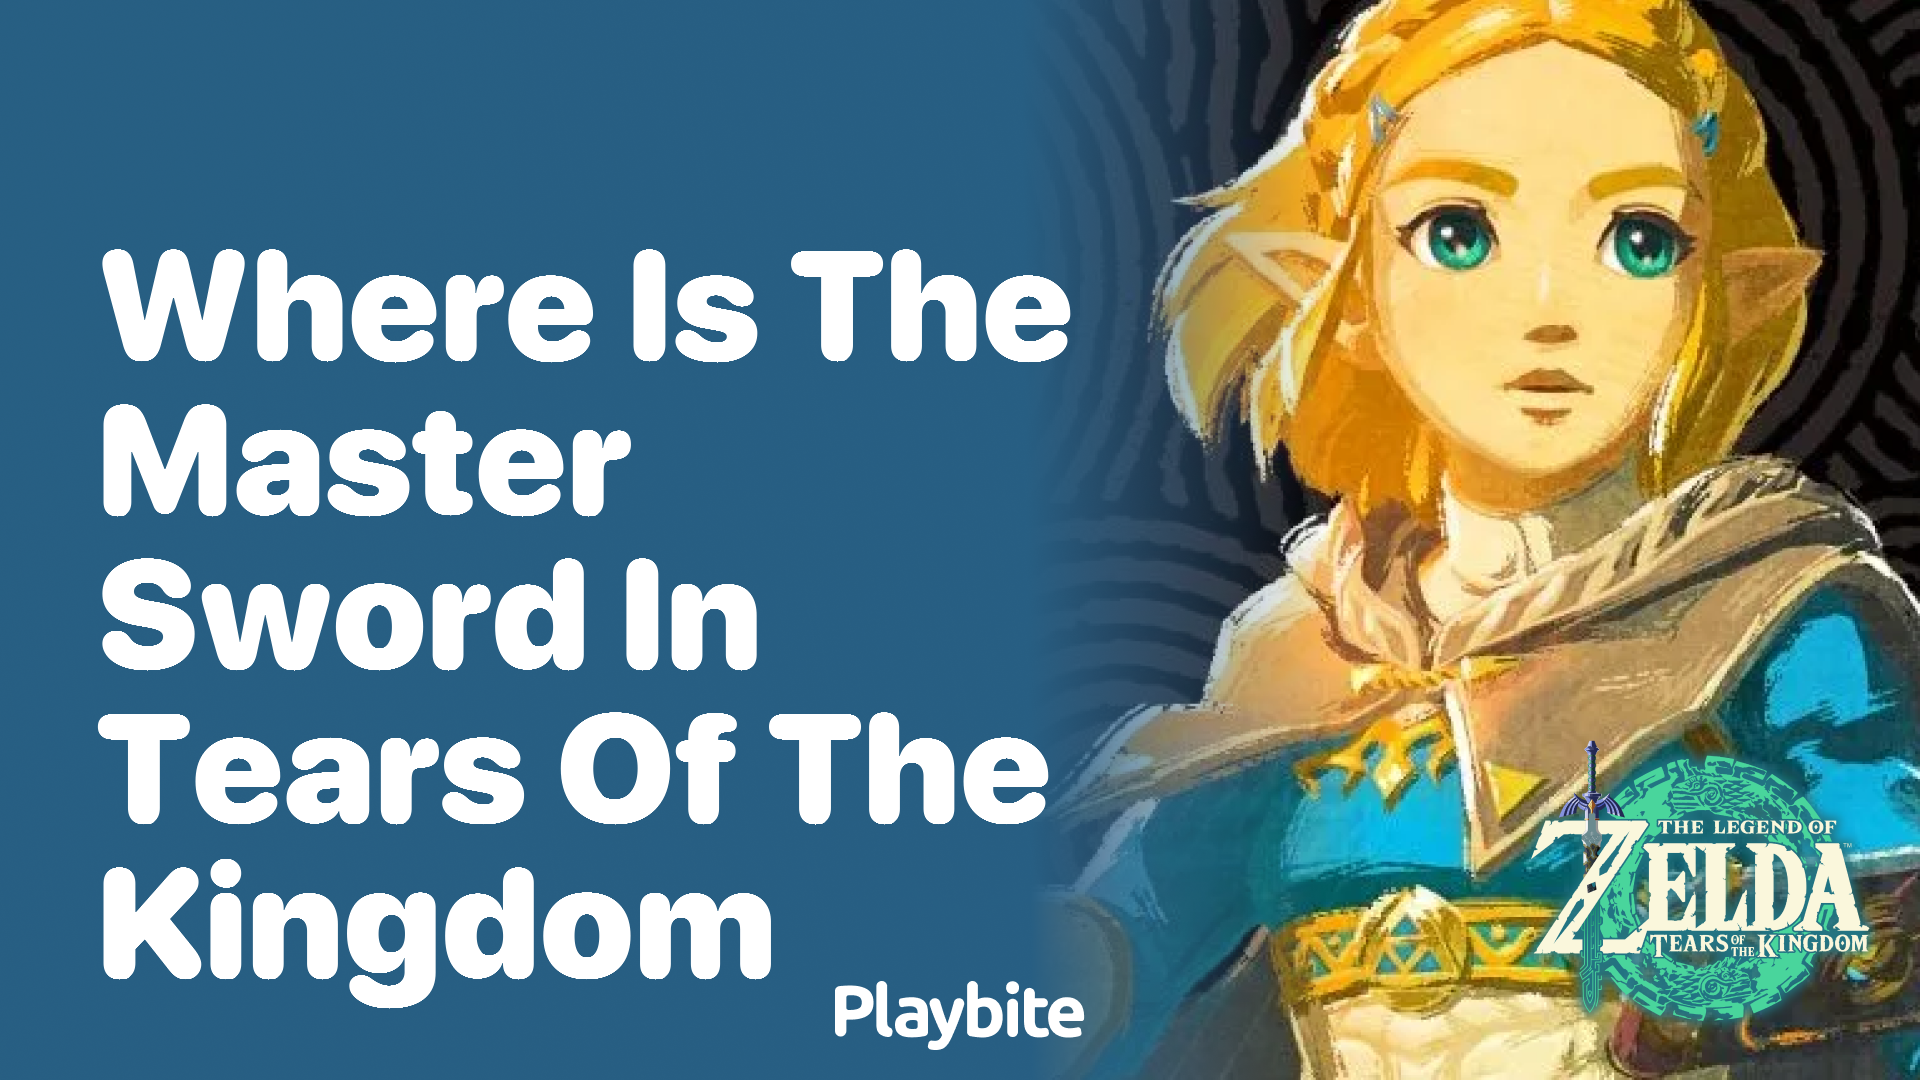 Where is the Master Sword in Tears of the Kingdom?